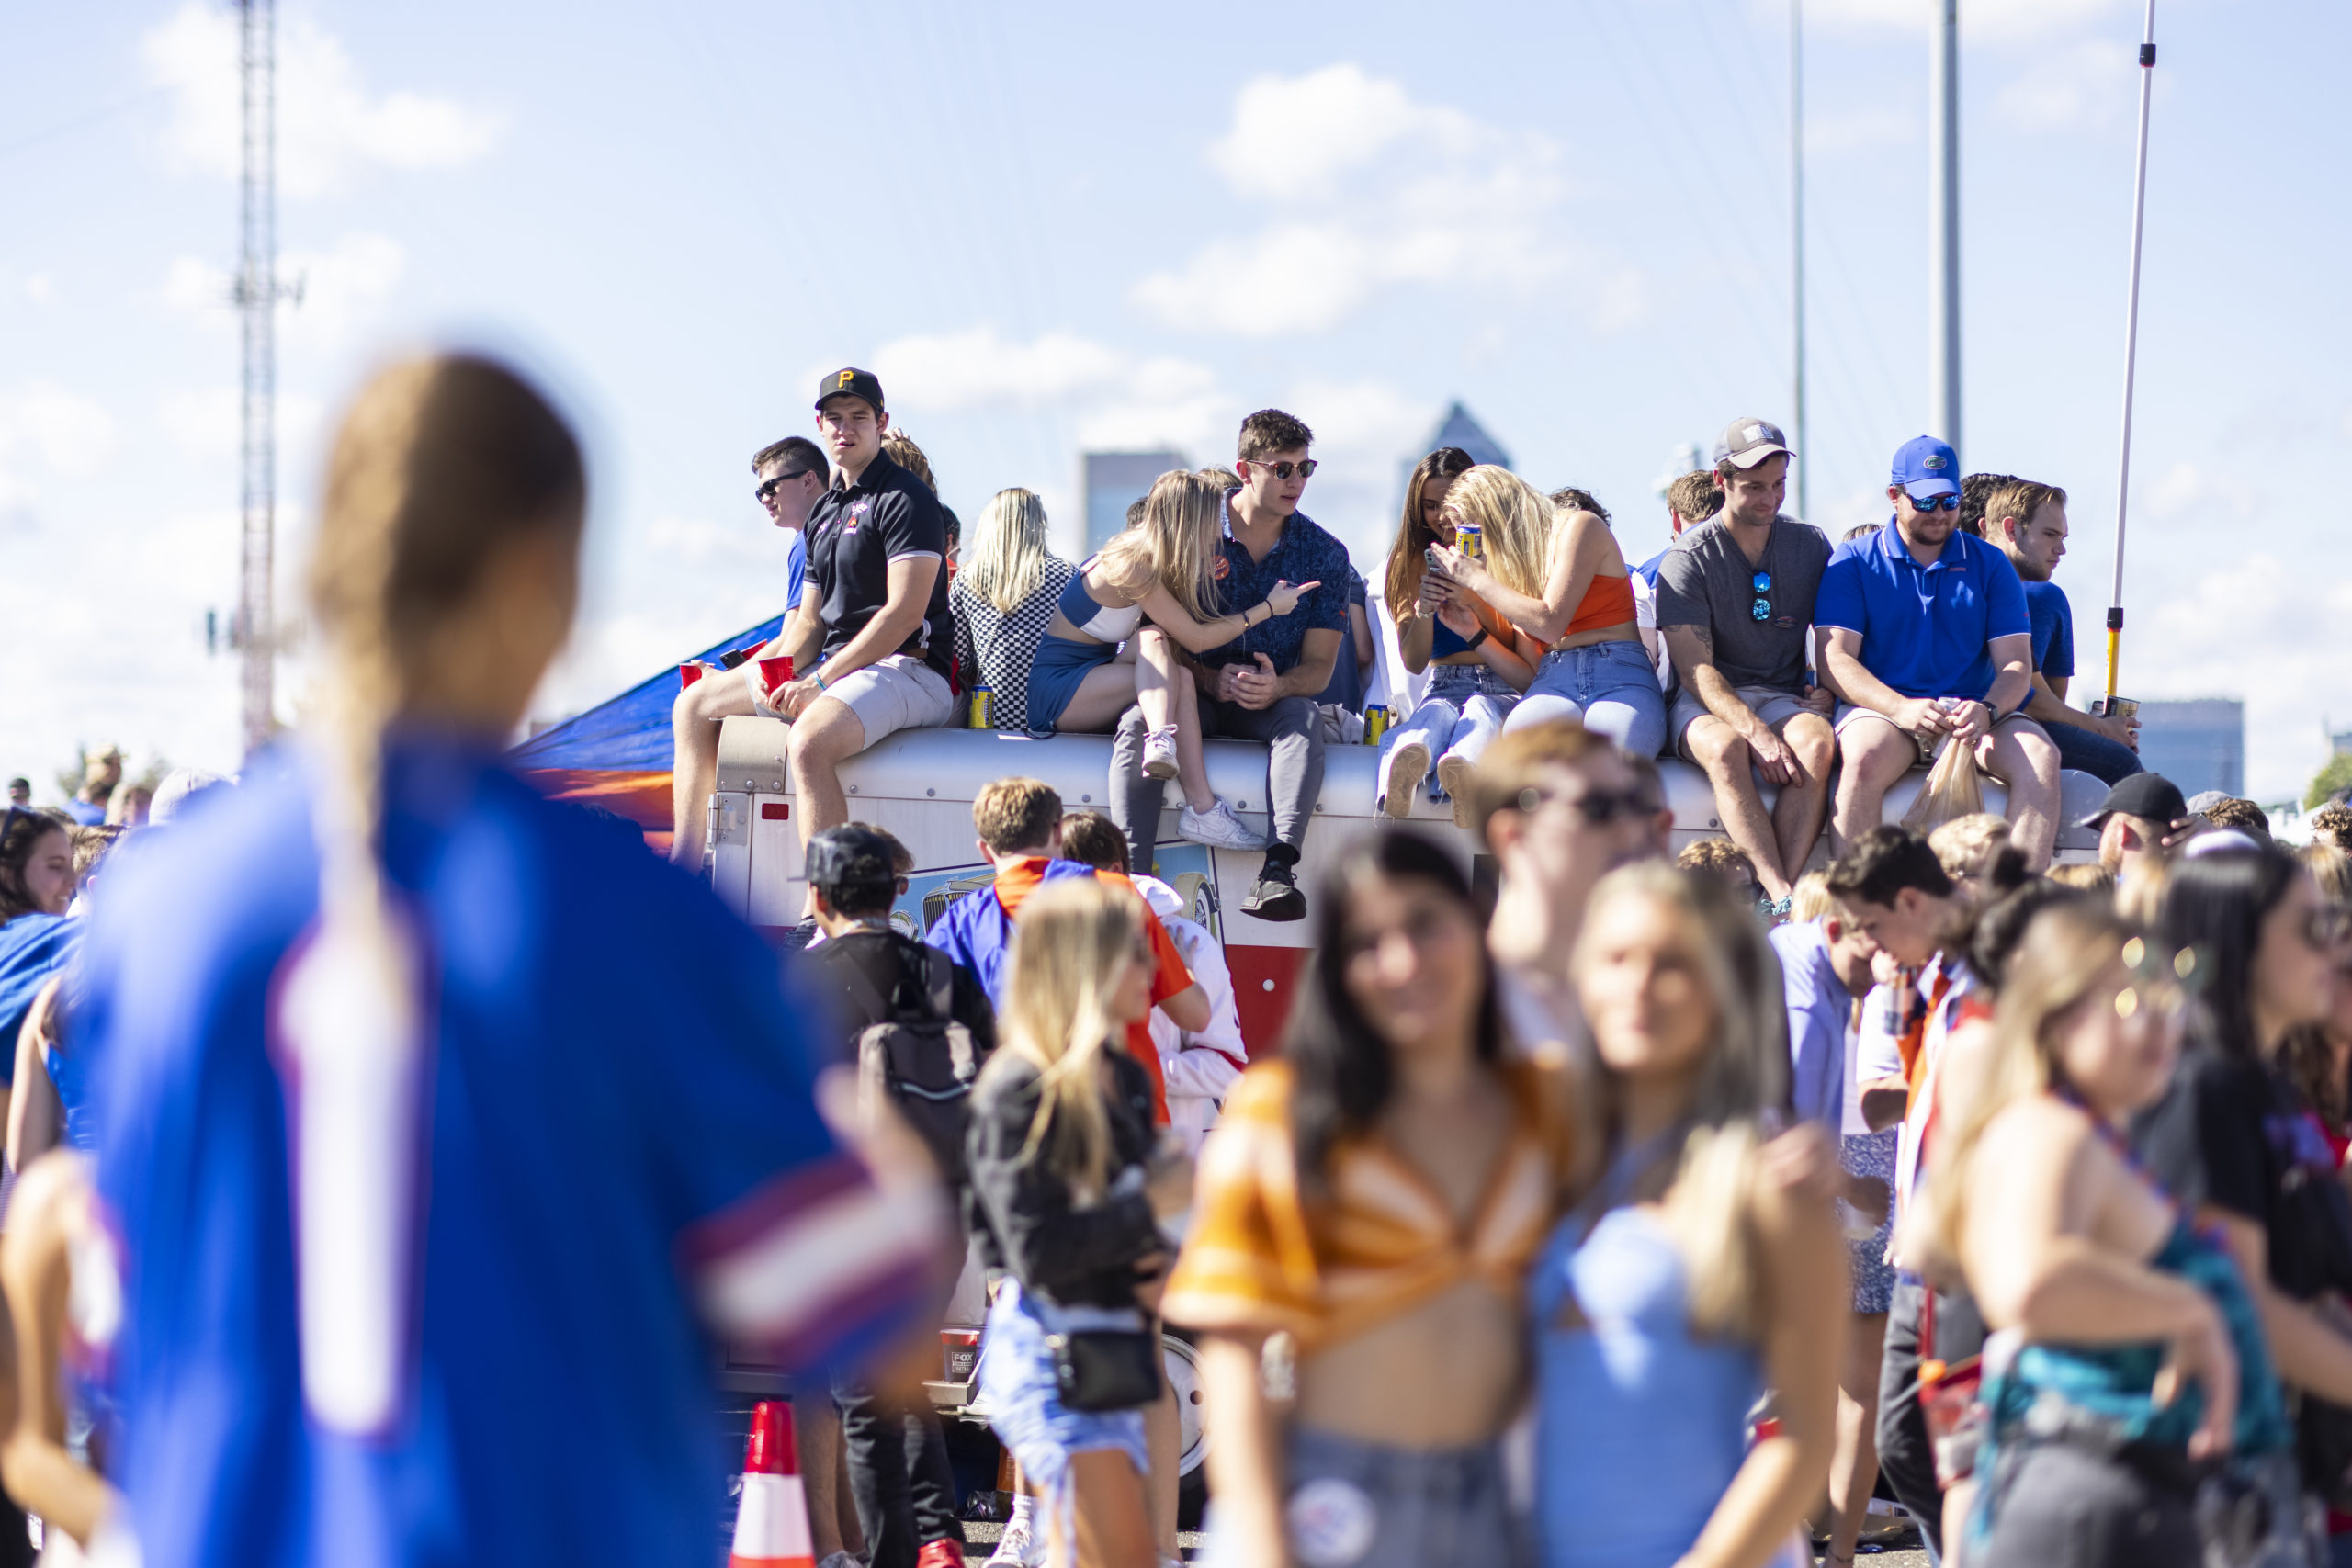 JACKSONVILLE, FLORIDA - OCTOBER 30: Fans tailgate before the start of a game between the Florida Gators and the Georgia Bulldogs at TIAA Bank Field on October 30, 2021 in Jacksonville, Florida. (Photo by James Gilbert/Getty Images)